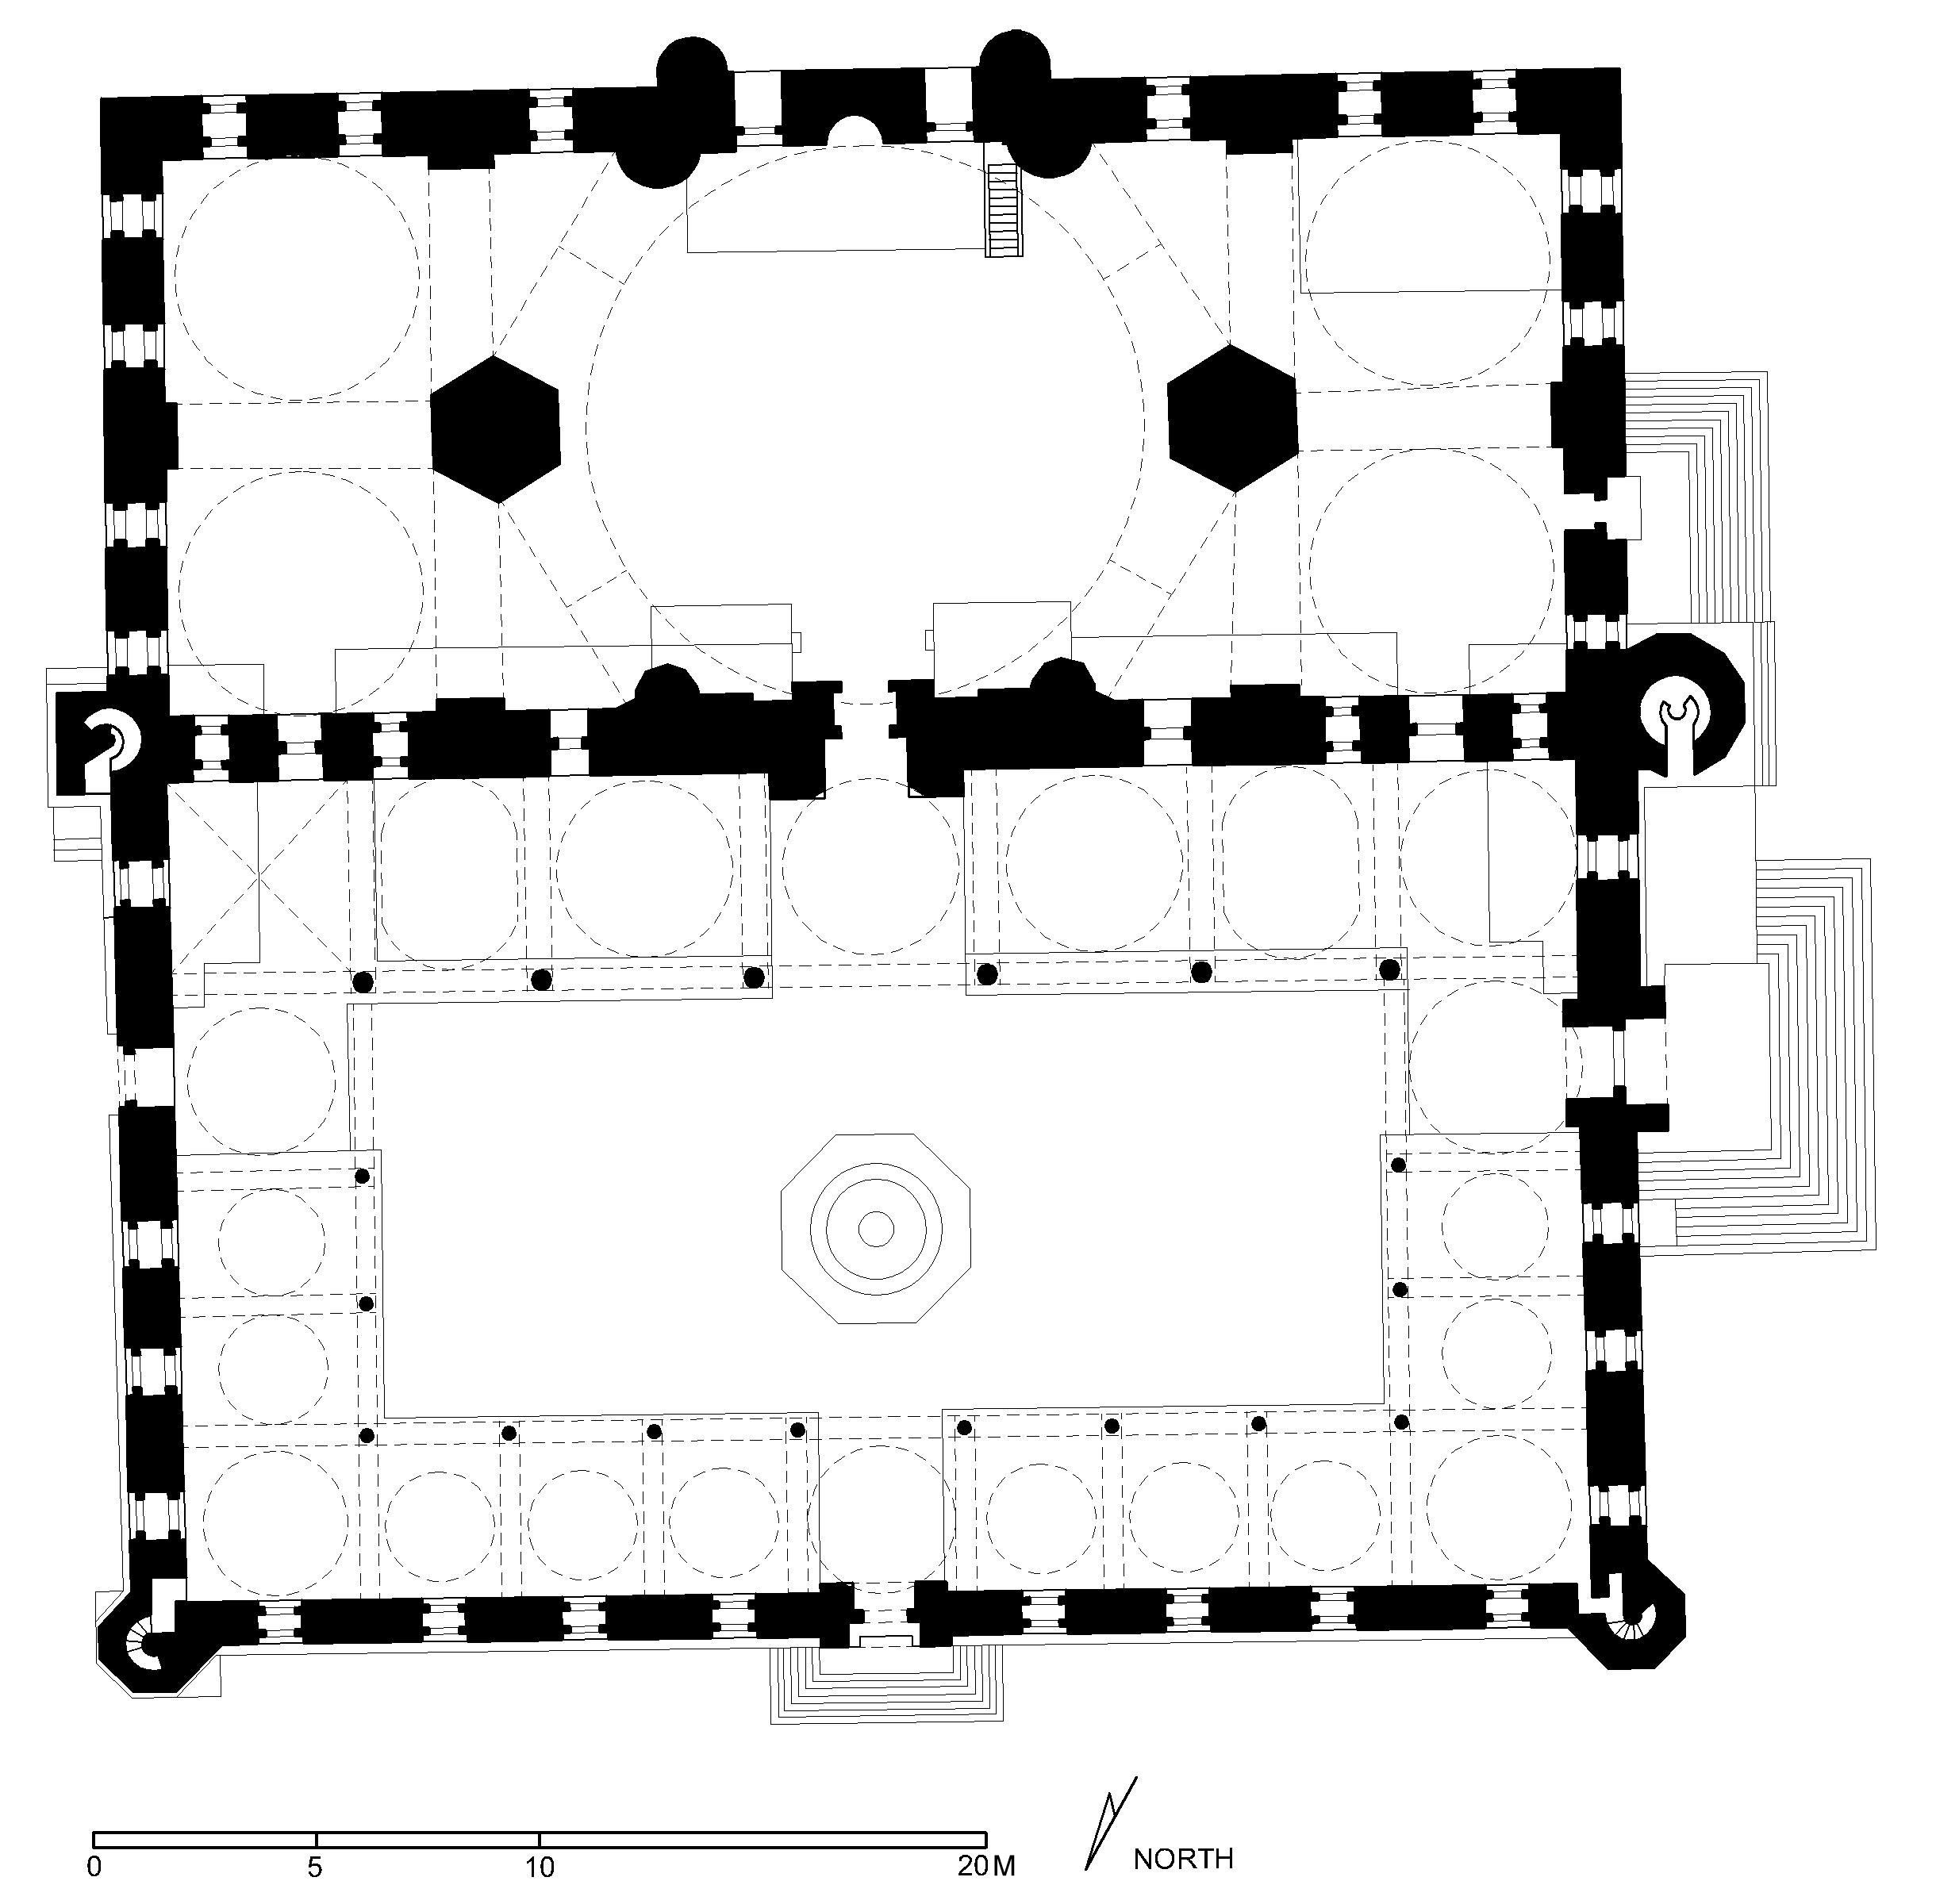 Üç Şerefeli Cami - Floor plan of mosque (after Meinecke) in AutoCAD 2000 format. Click the download button to download a zipped file containing the .dwg file. 